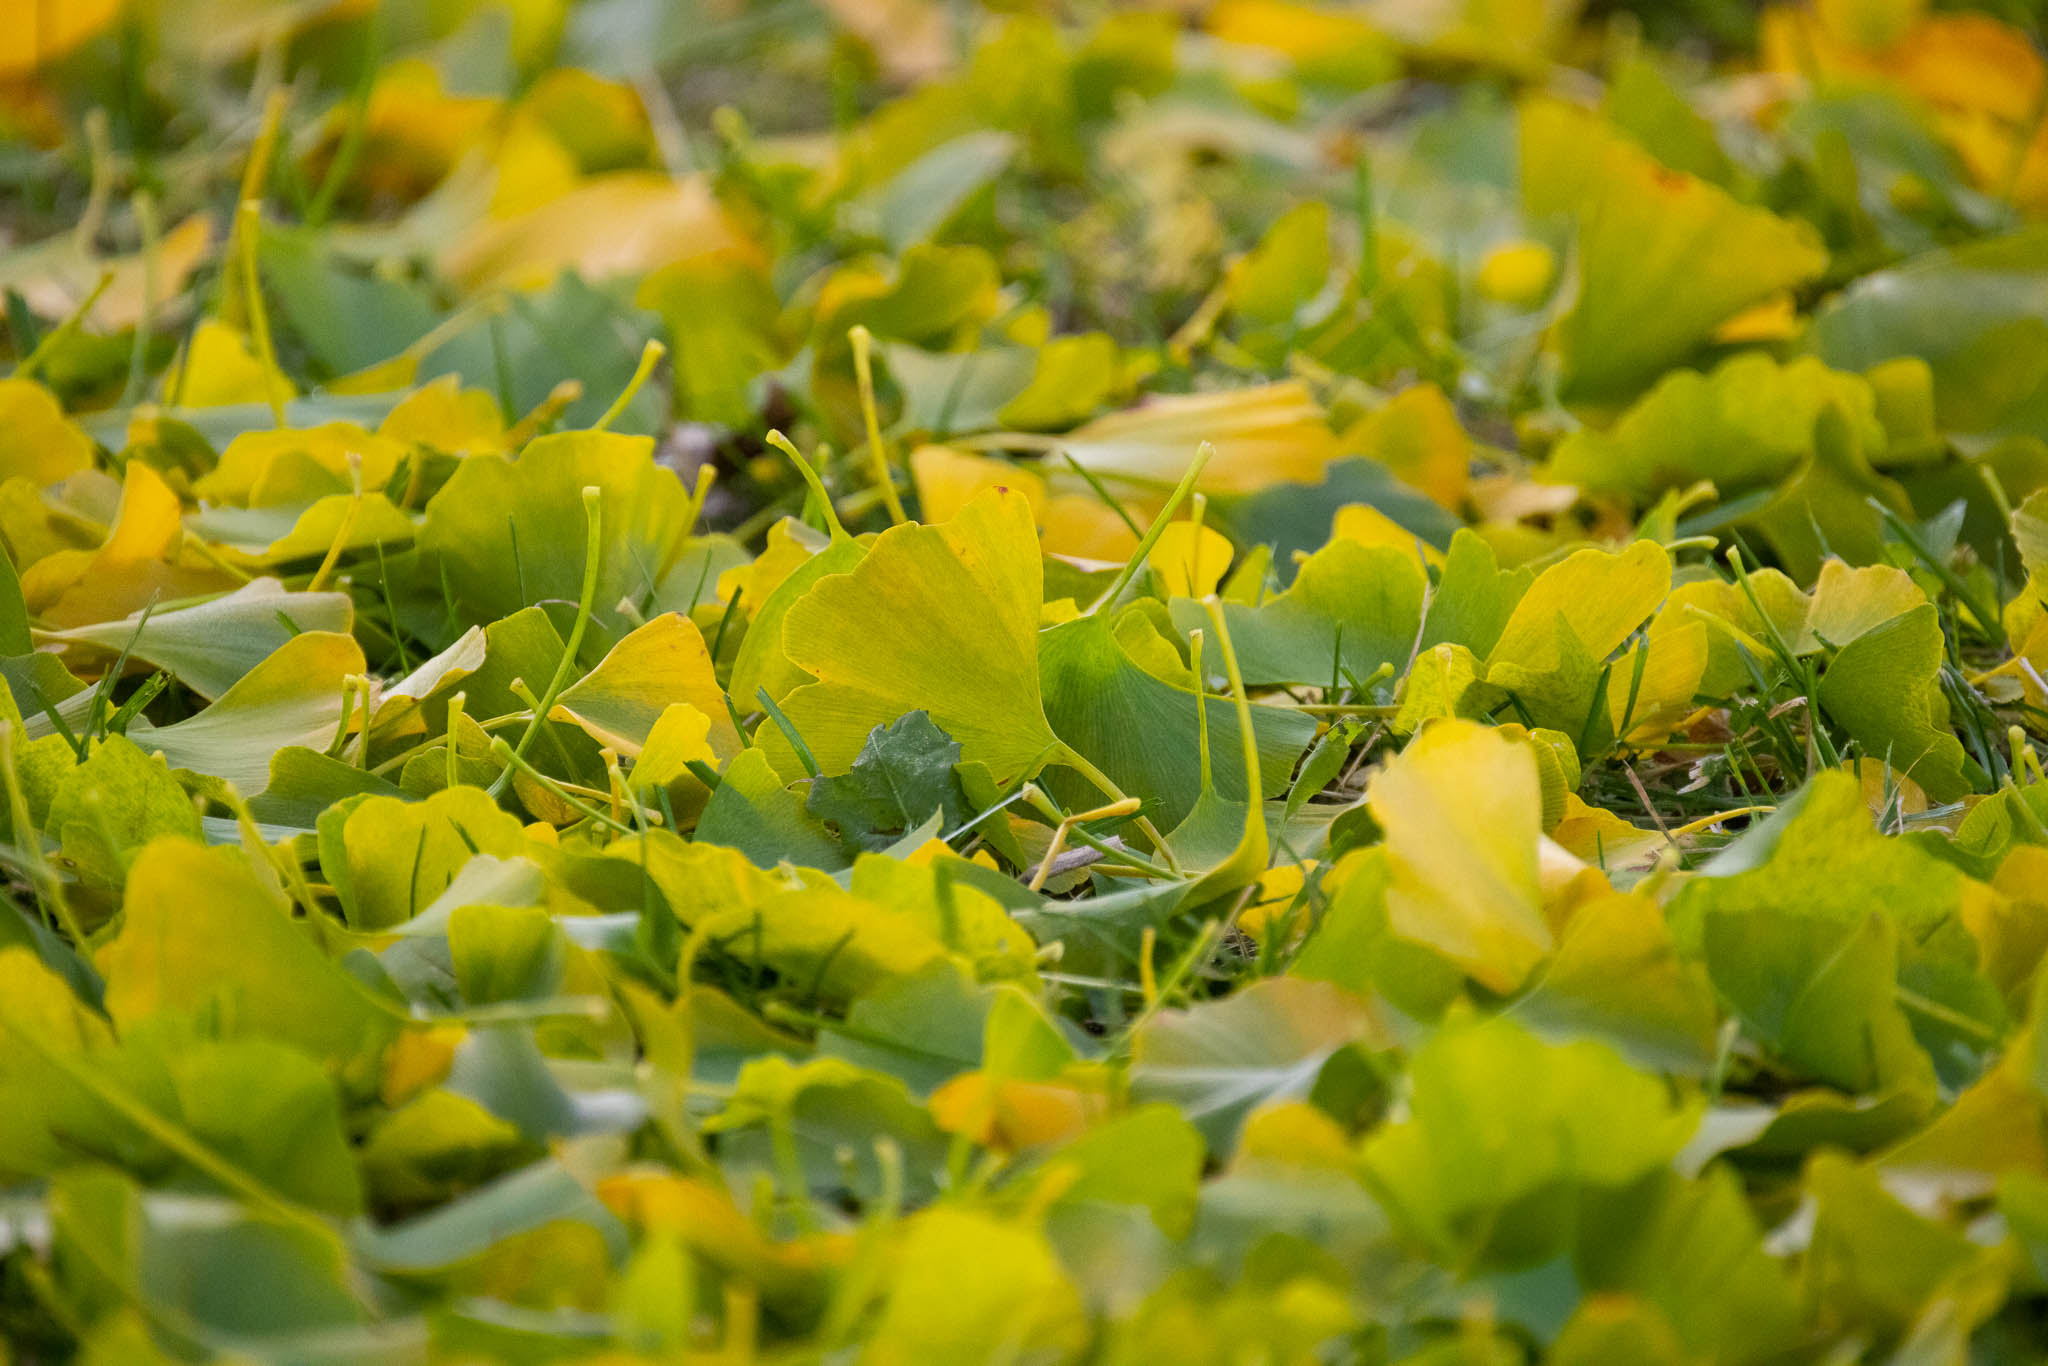 Many green and slightly yellow leaves on the ground.